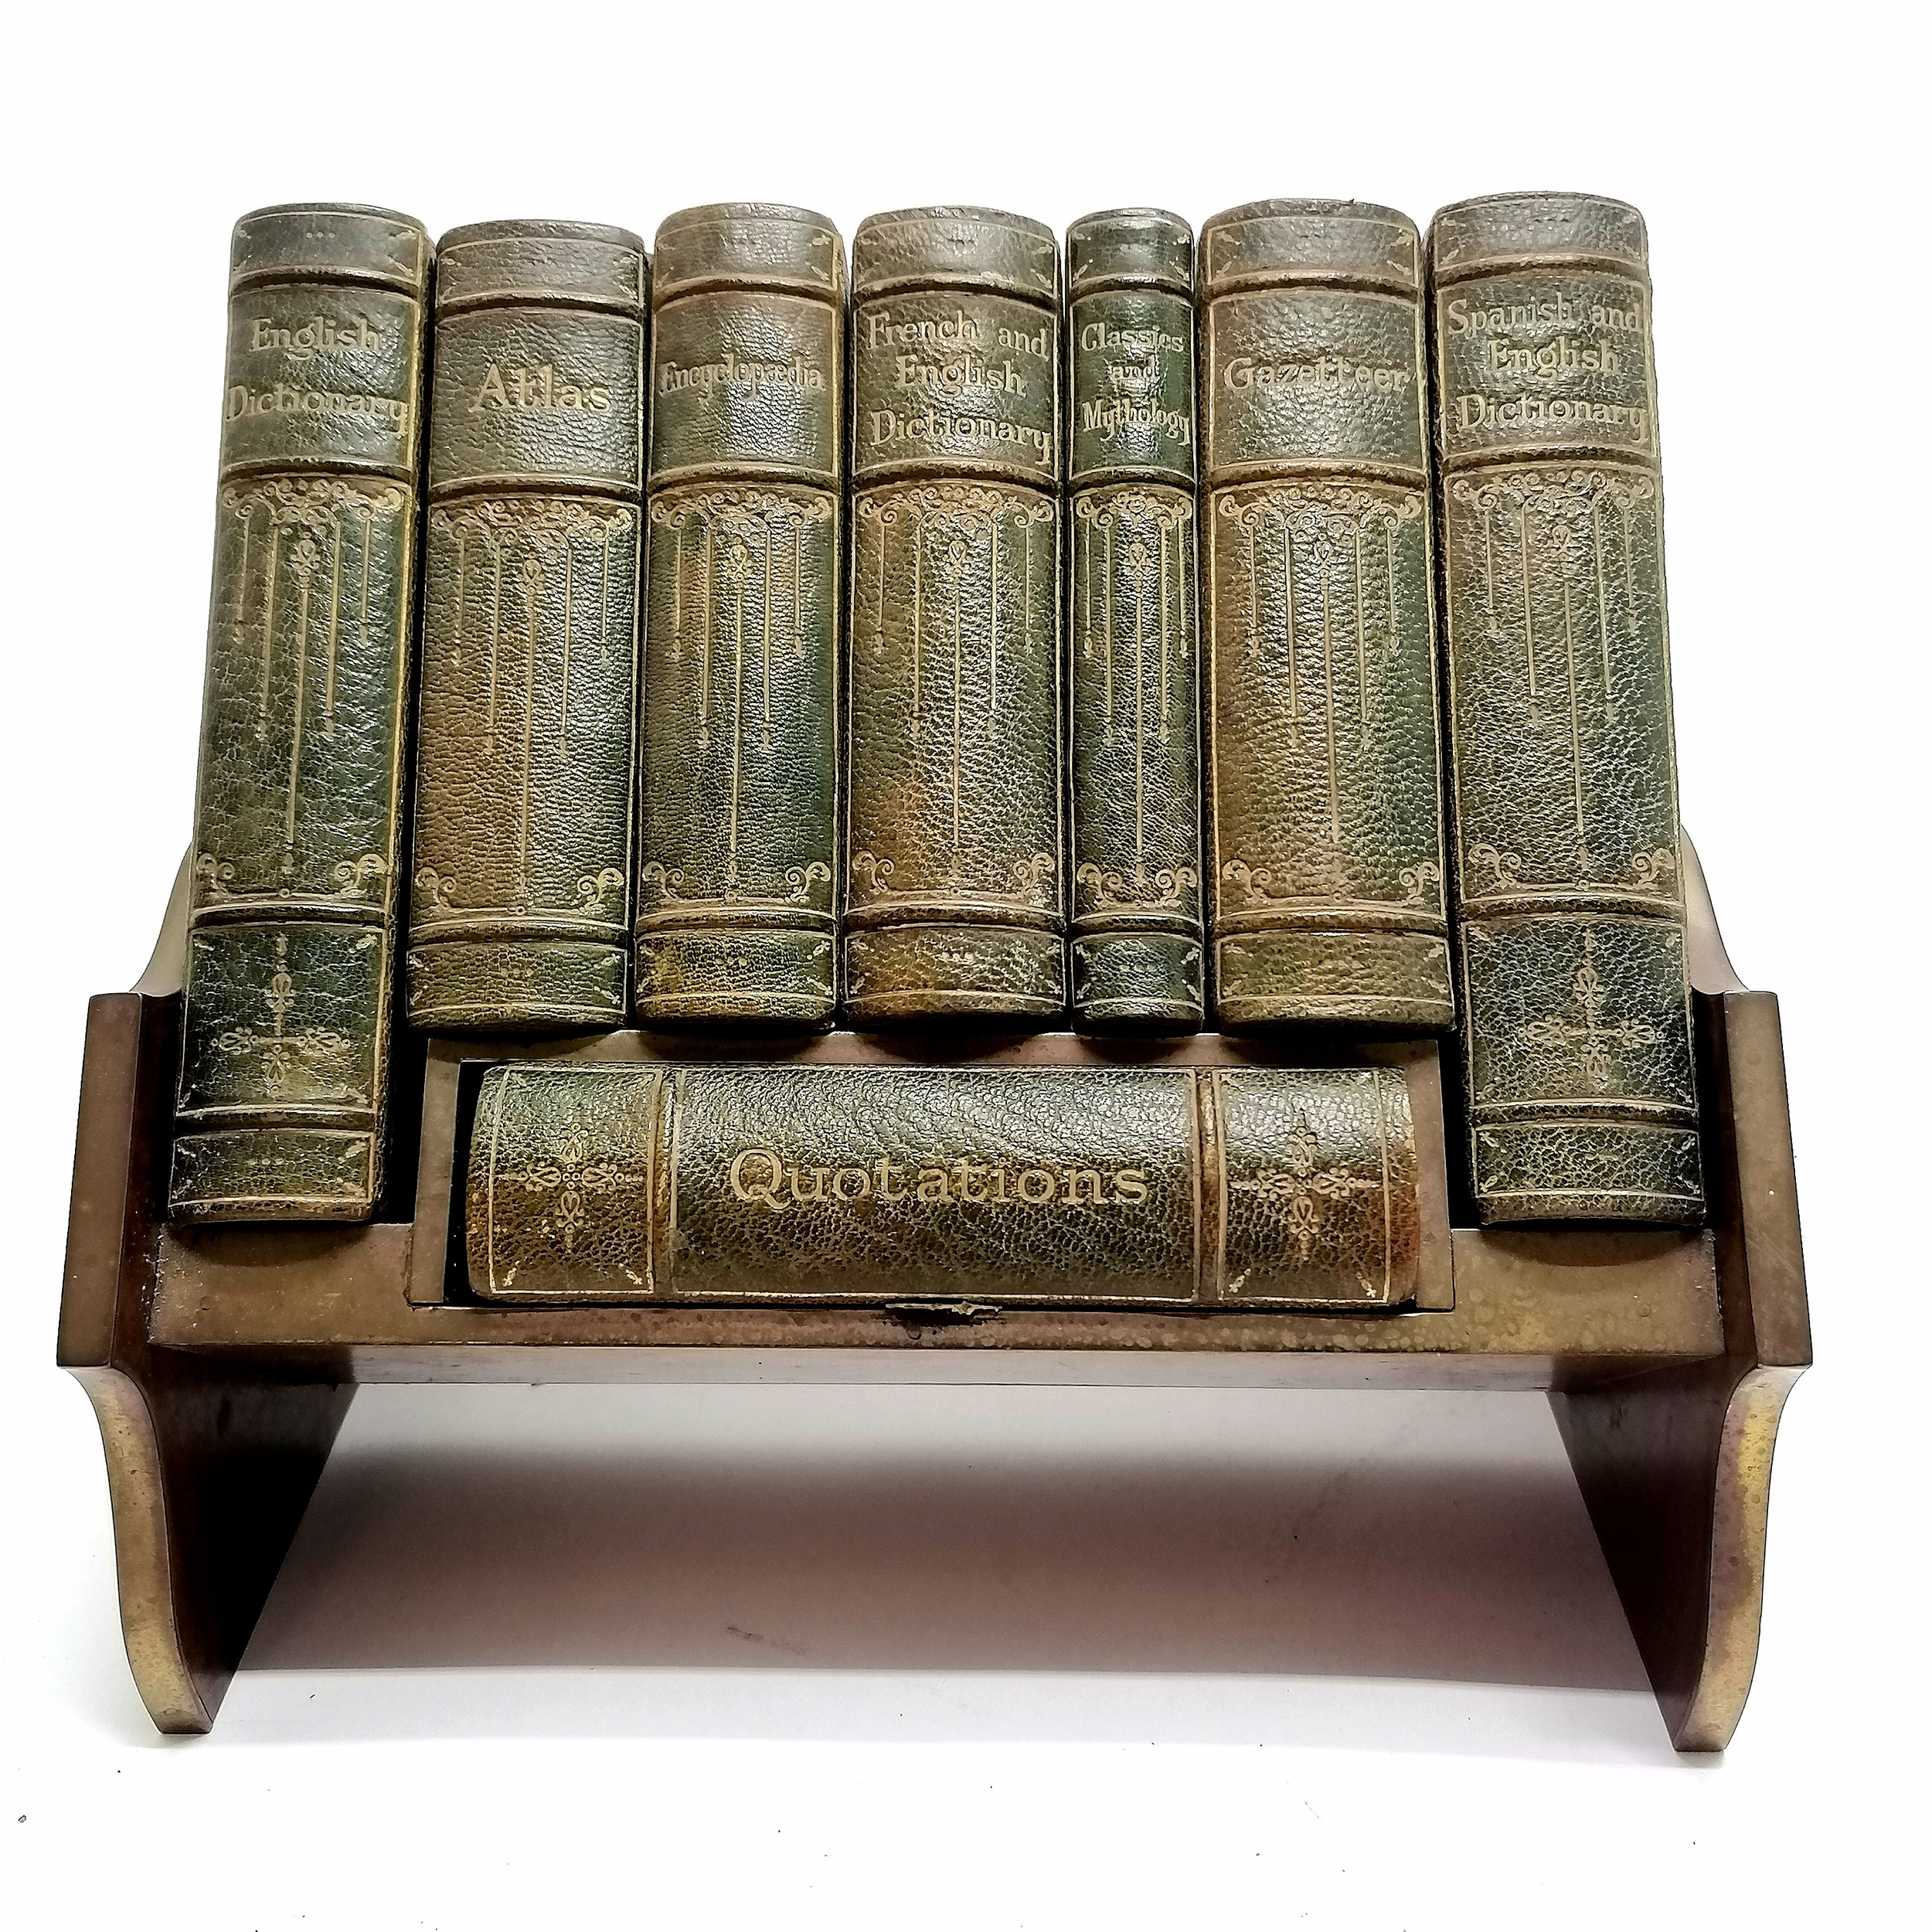 Aspreys partridge wood & brass mounted bookstand with original Aspreys green leather bound reference - Image 5 of 5